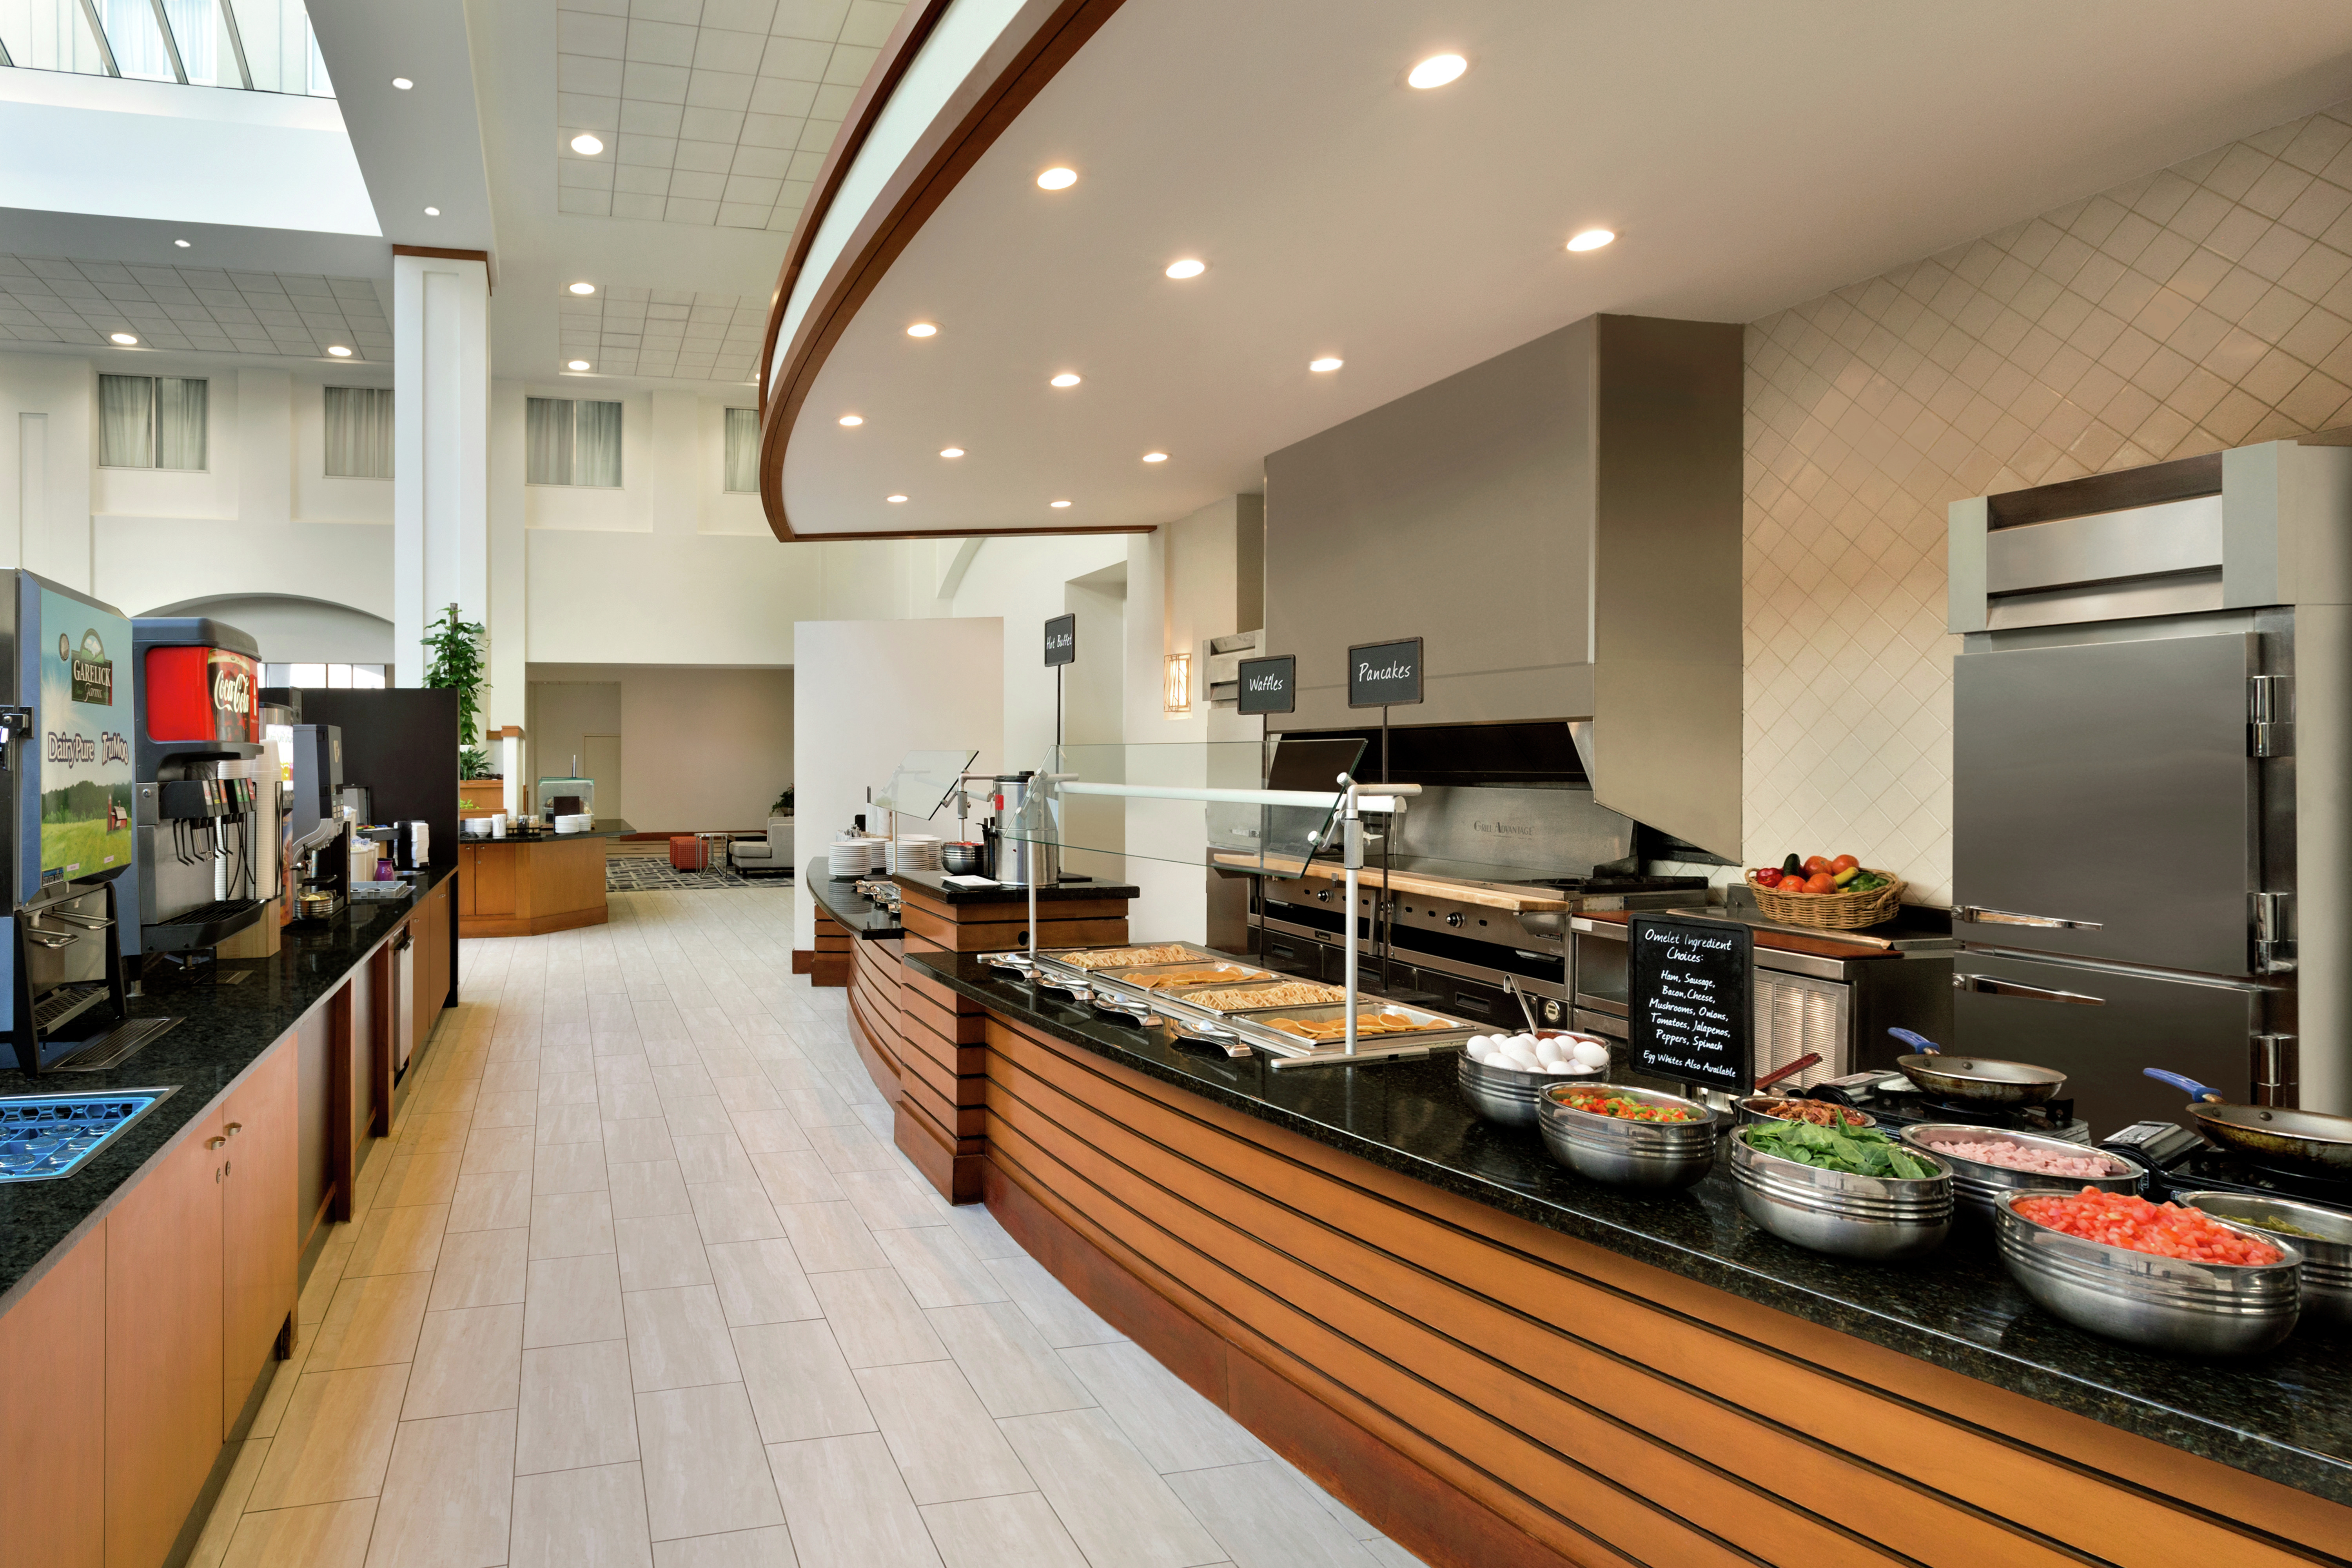 Complimentary Breakfast Area with Food Selections